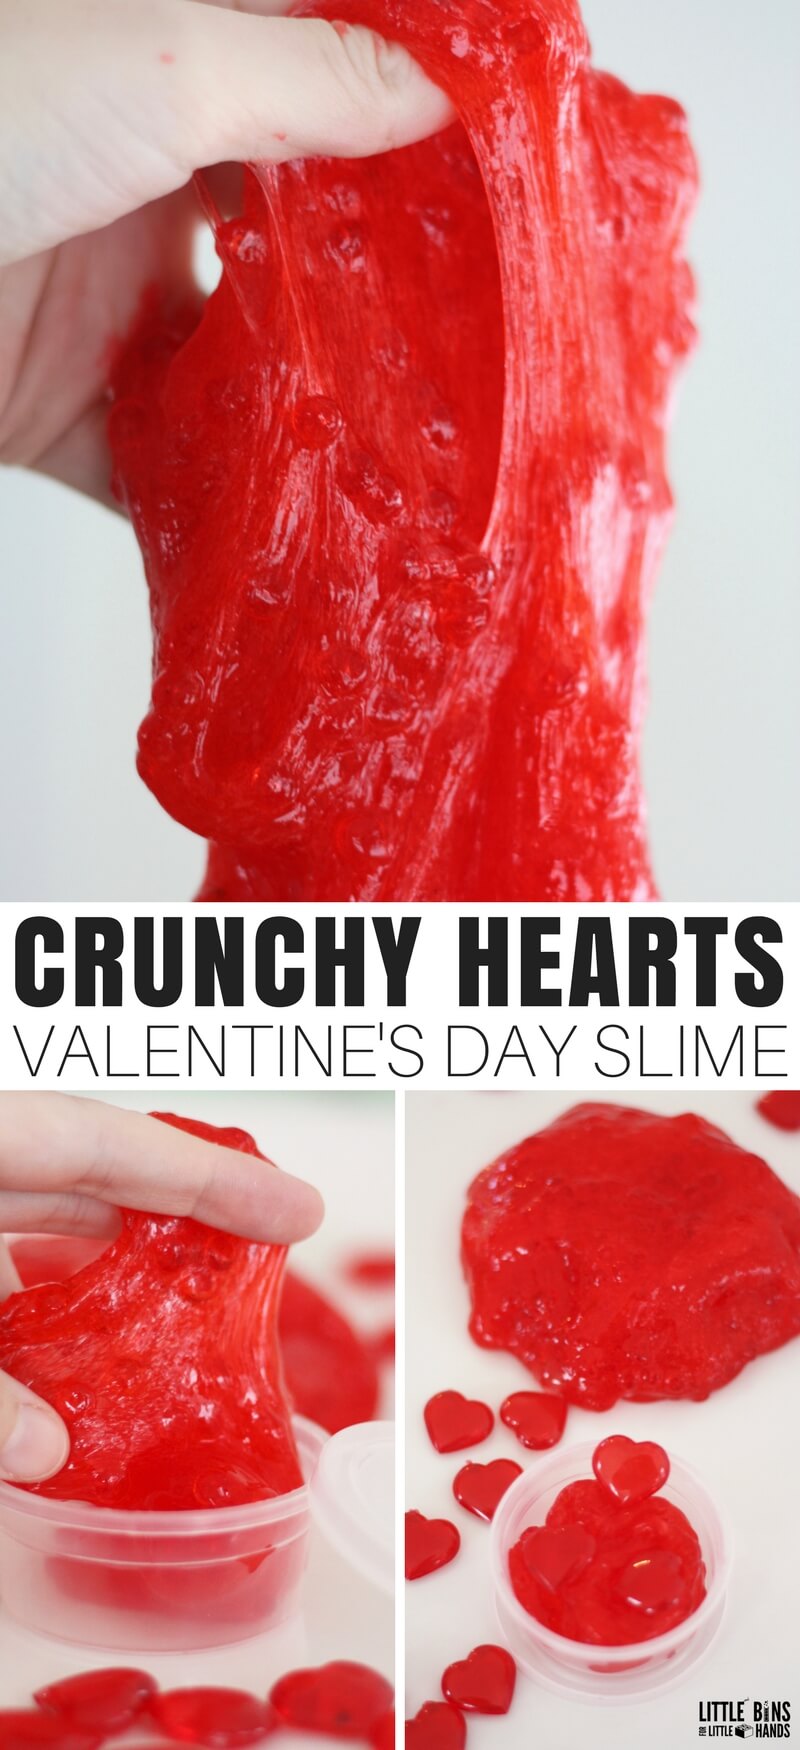 The BEST Valentines Day crunchy slime recipe the kids will love to make this season. Amazing and easy slime recipe that uses crunchy fishbowl slime beads and our easiest saline solution slime recipe. Make homemade slime that's stretchy and fun for Valentine's Day science and sensory play!